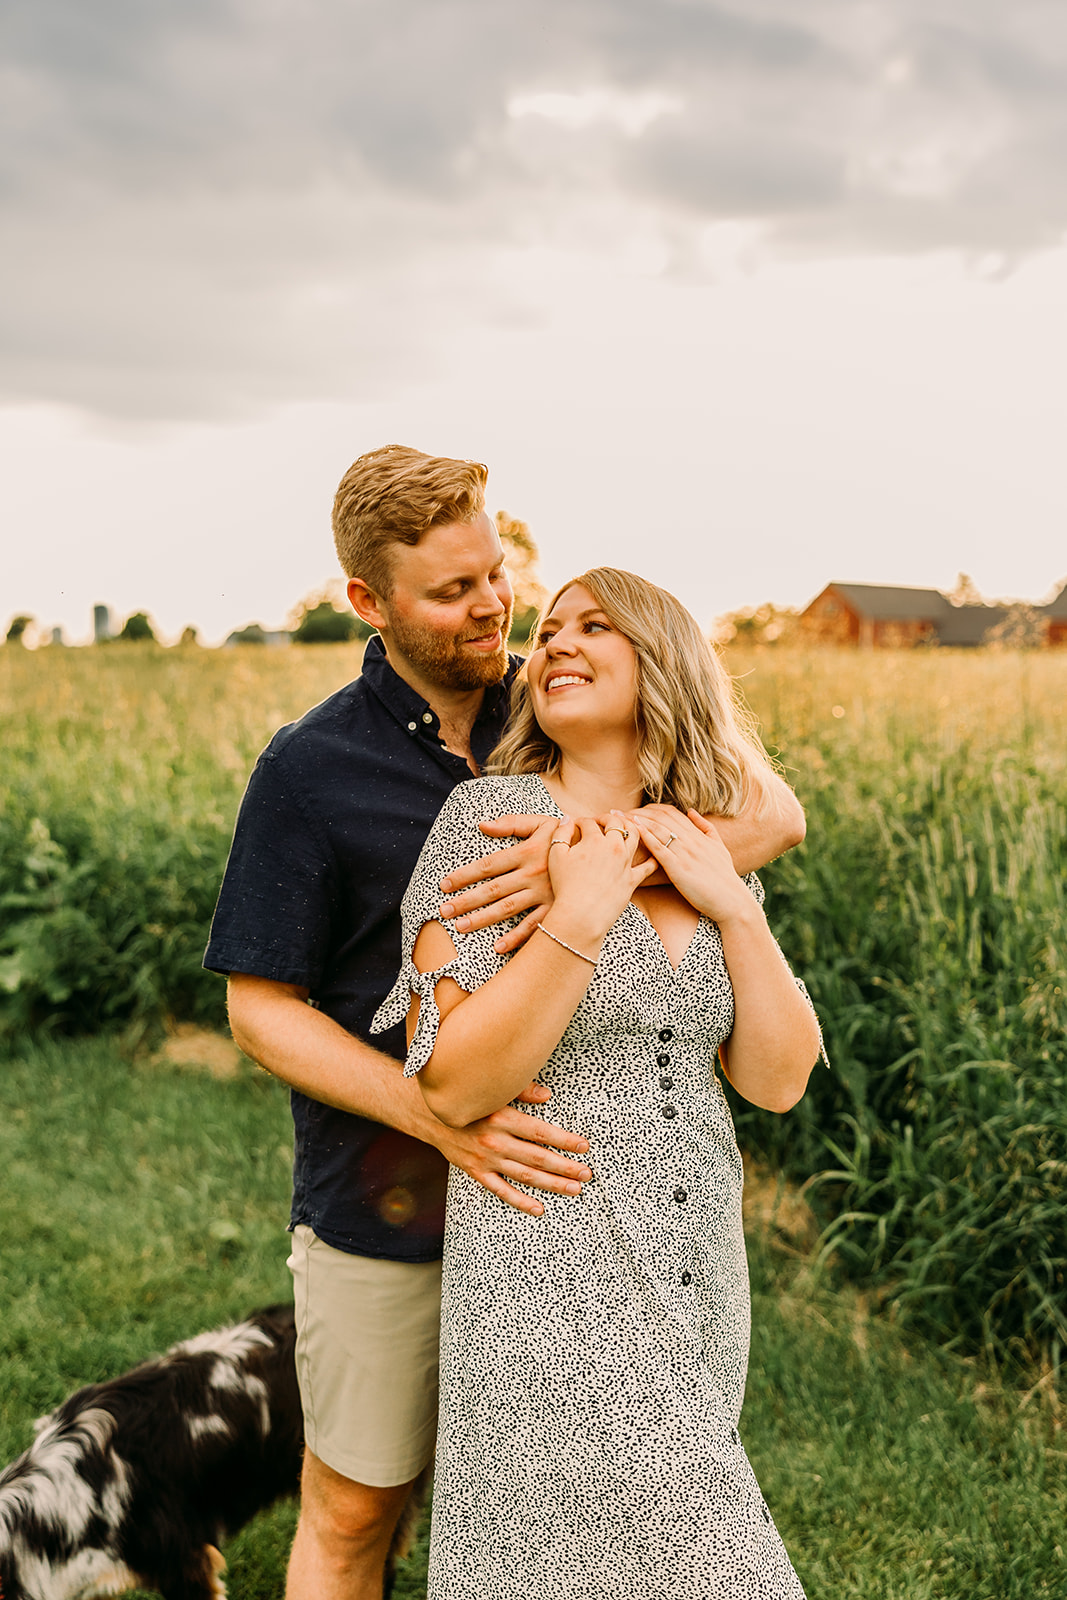 Couple's love radiates against the backdrop of the field